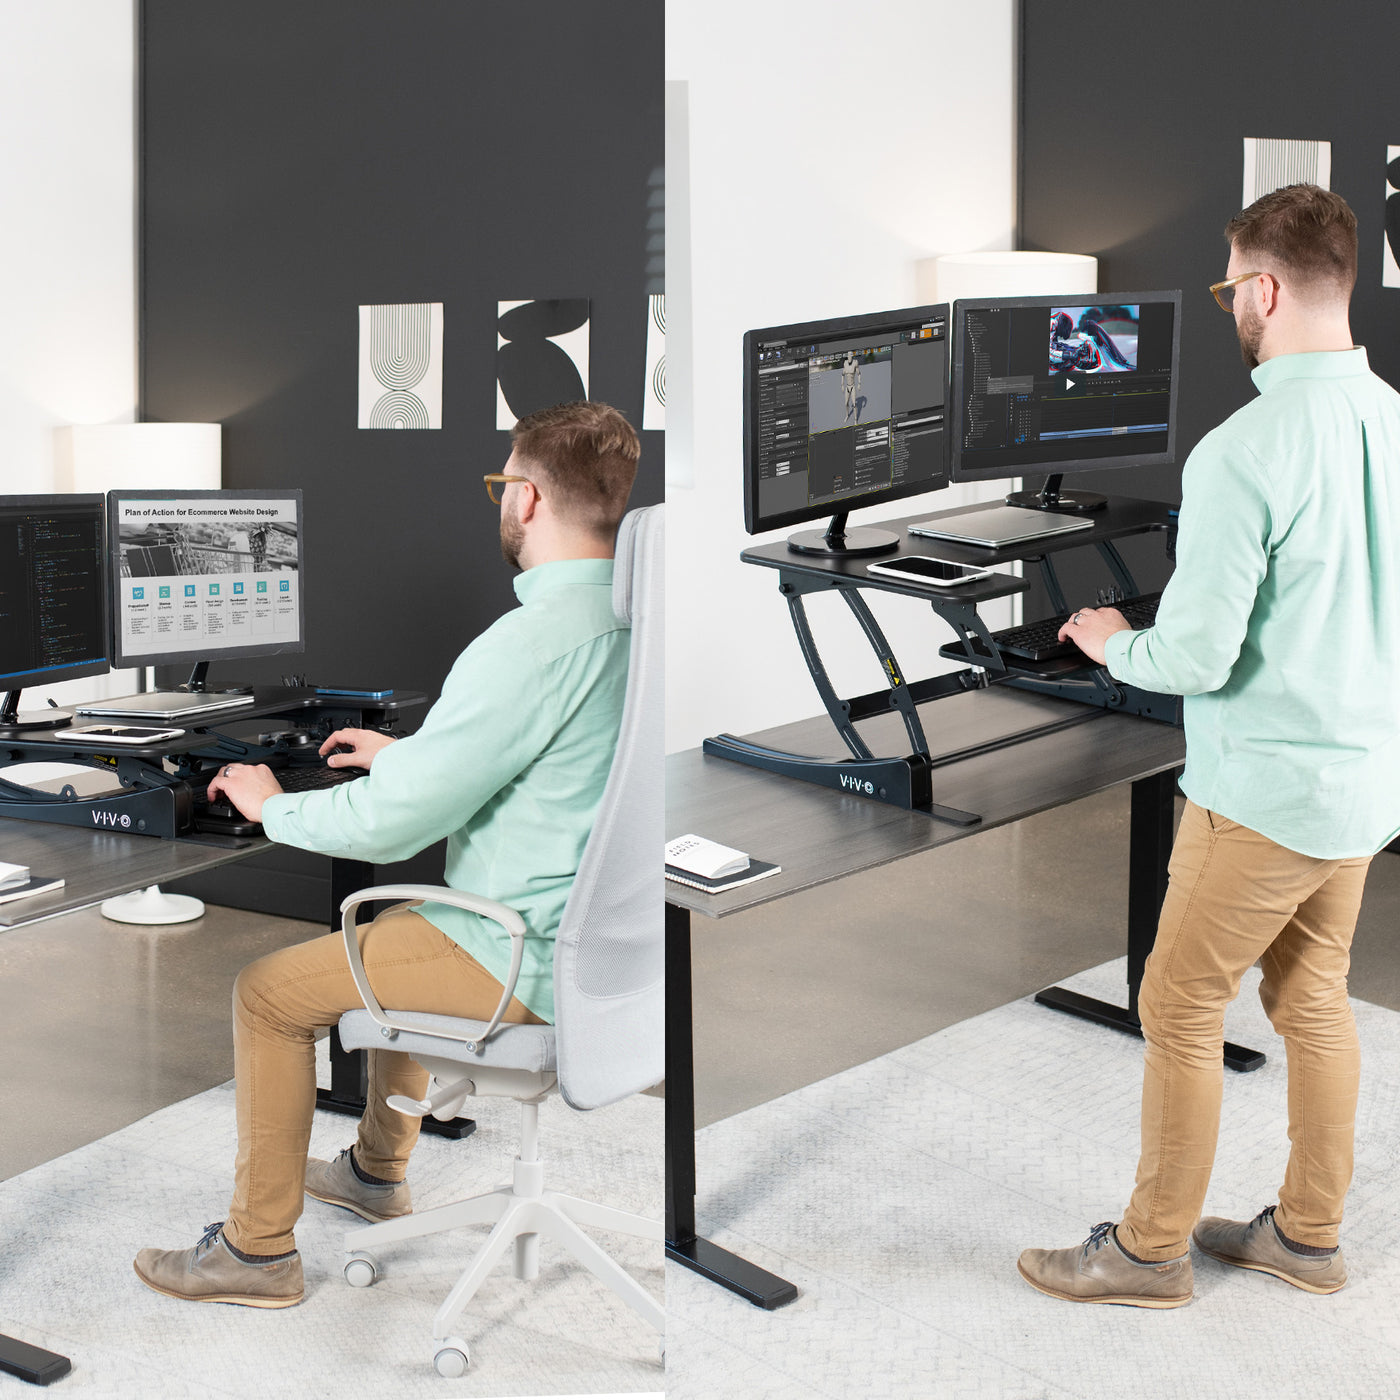 Dual-tiered, electric desk riser that sits on top of your current desk and gives you the benefit of standing up throughout the work day. 